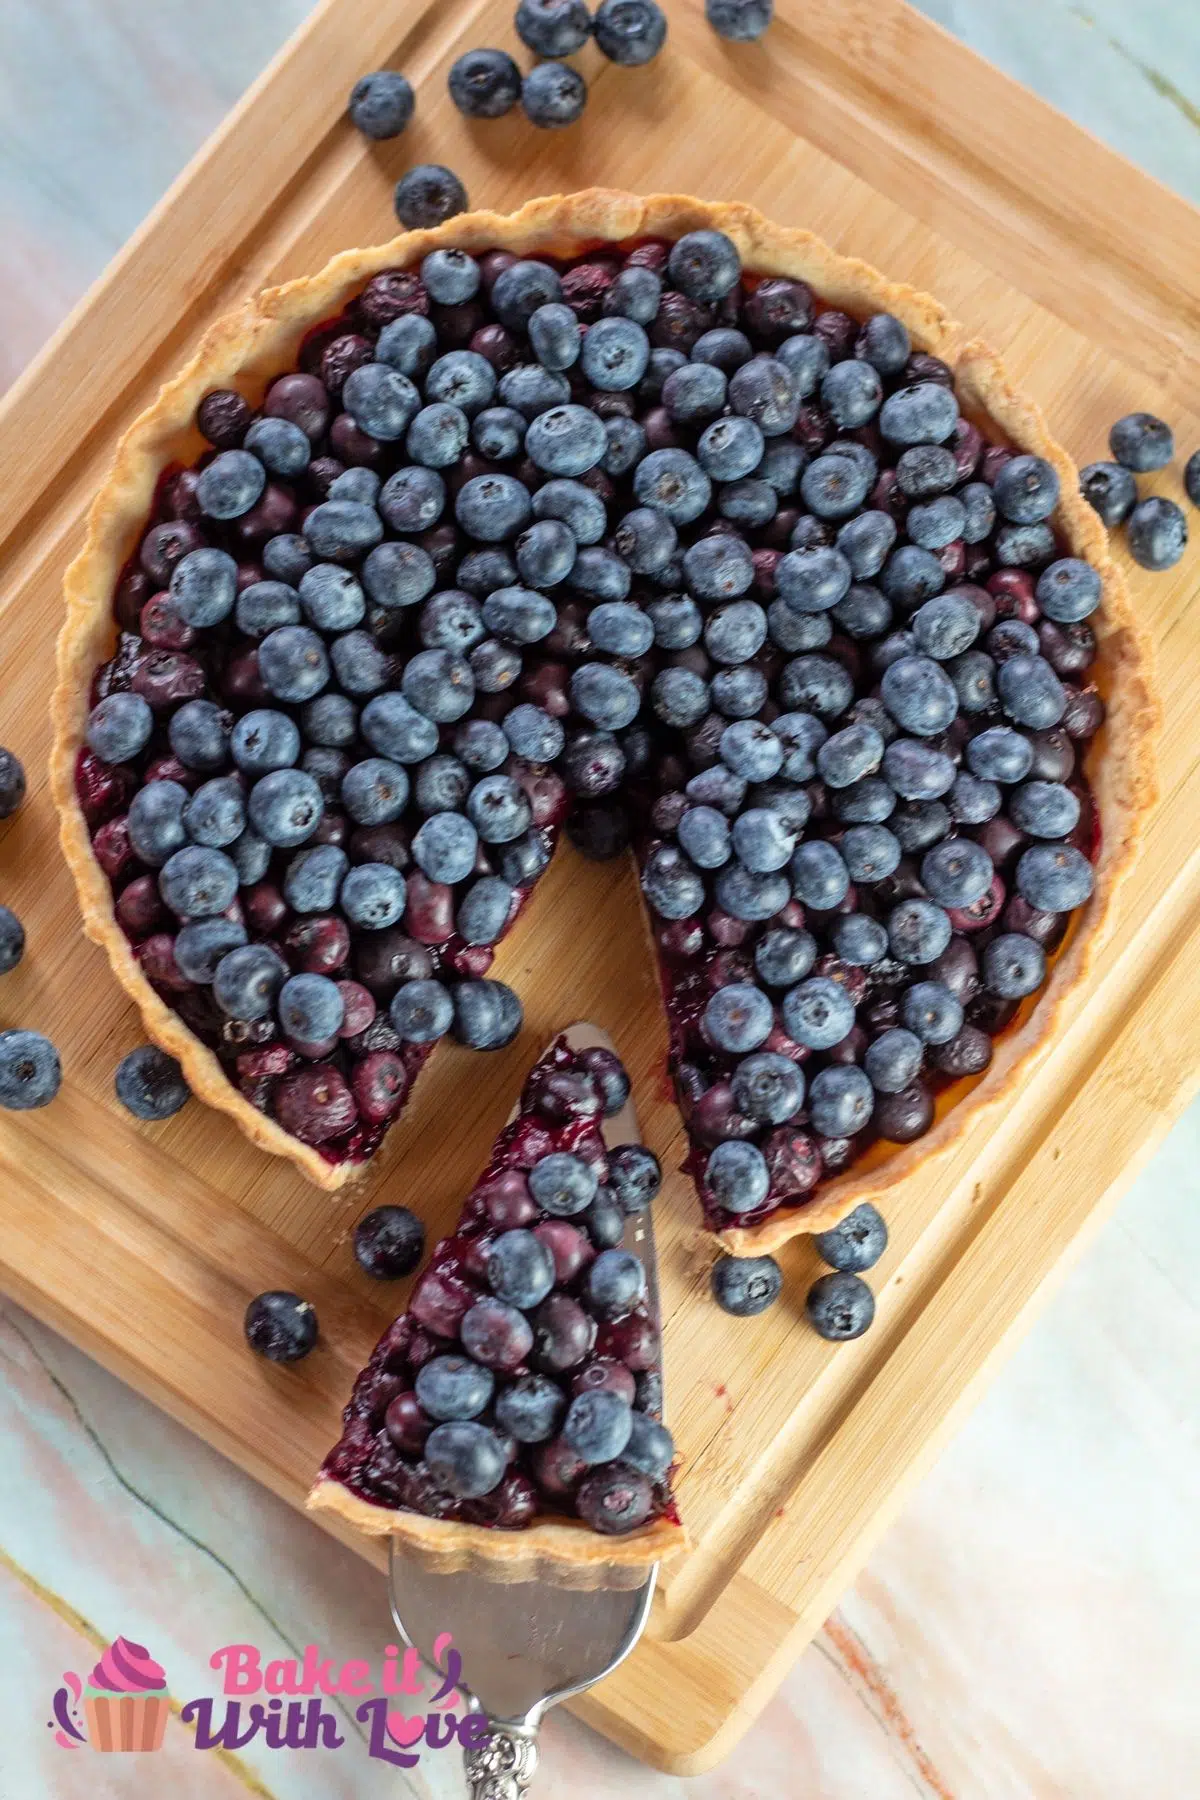 Tall image of blueberry tart on a cutting board with a slice pulled out.